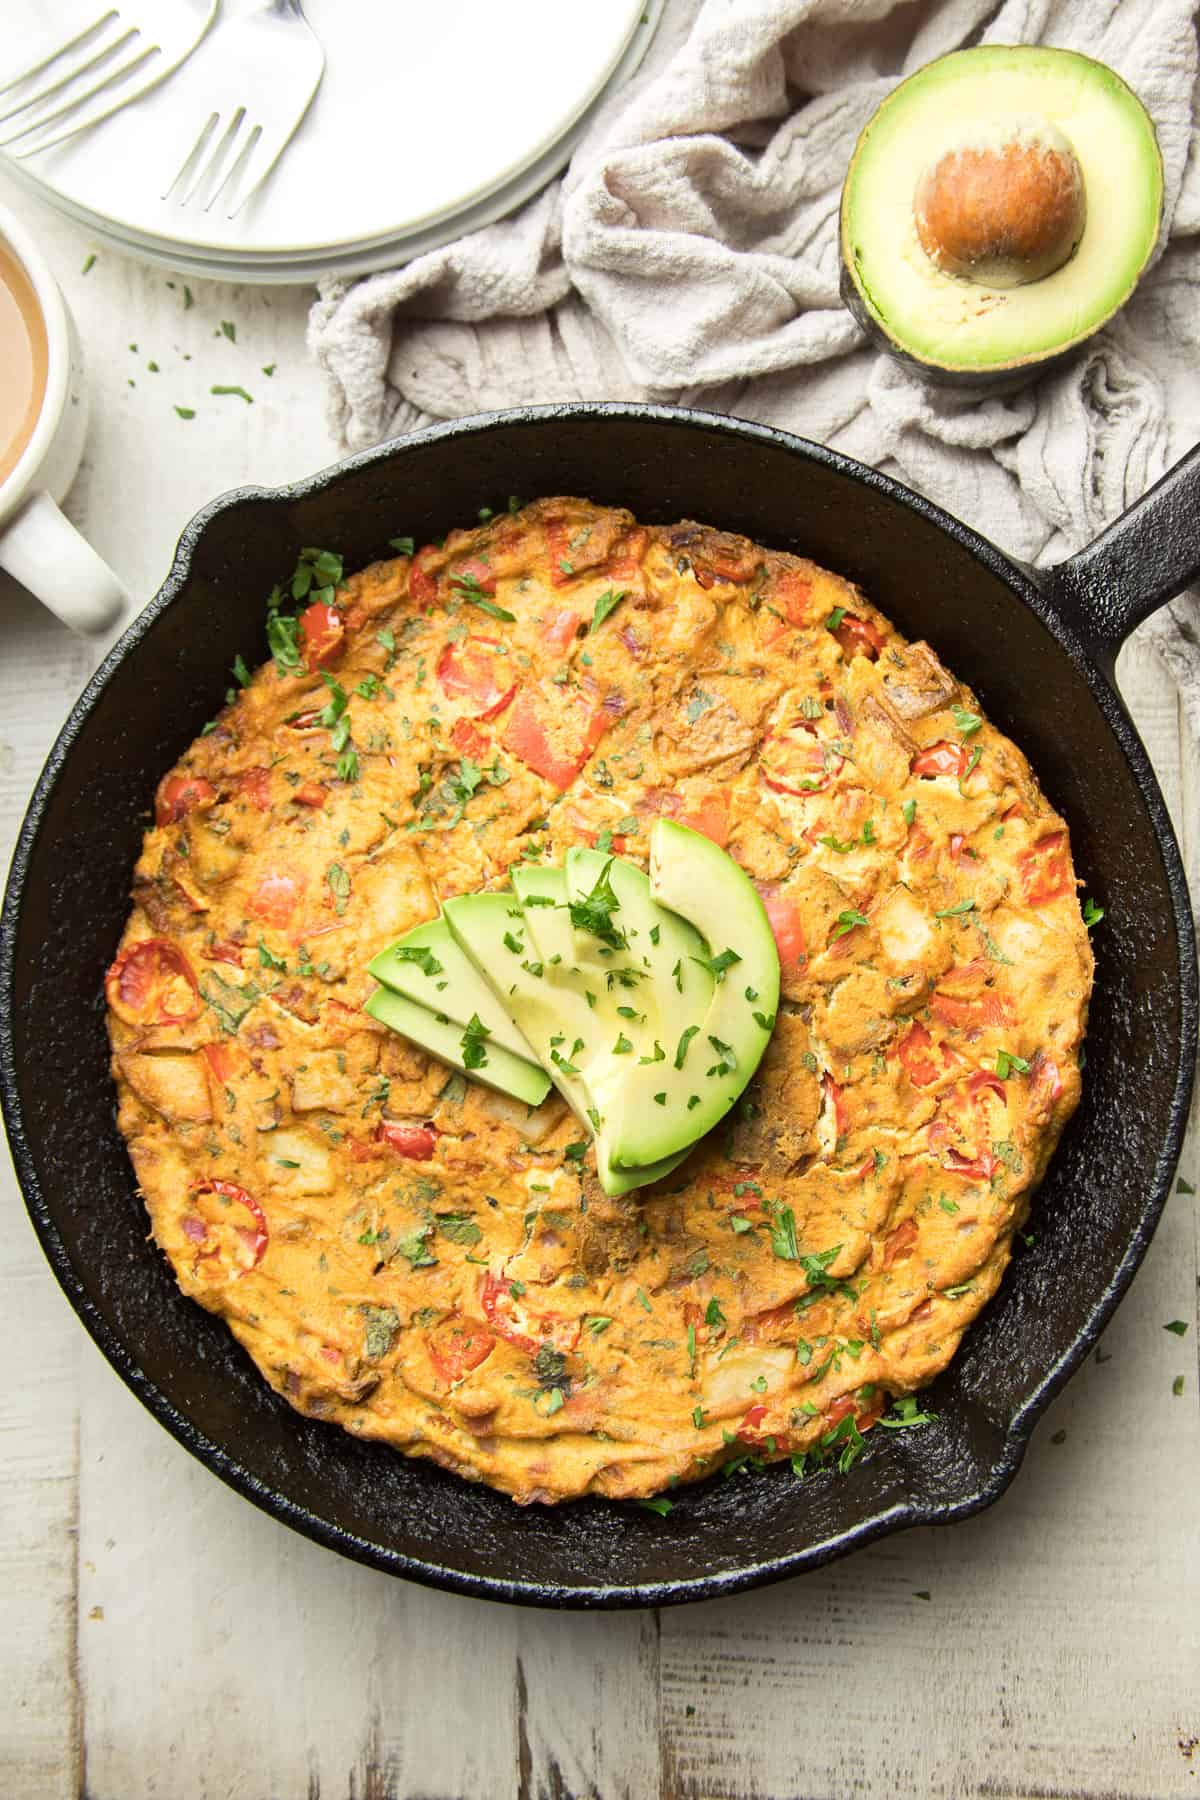 Whole Vegan Frittata in a skillet with avocado slices on top.